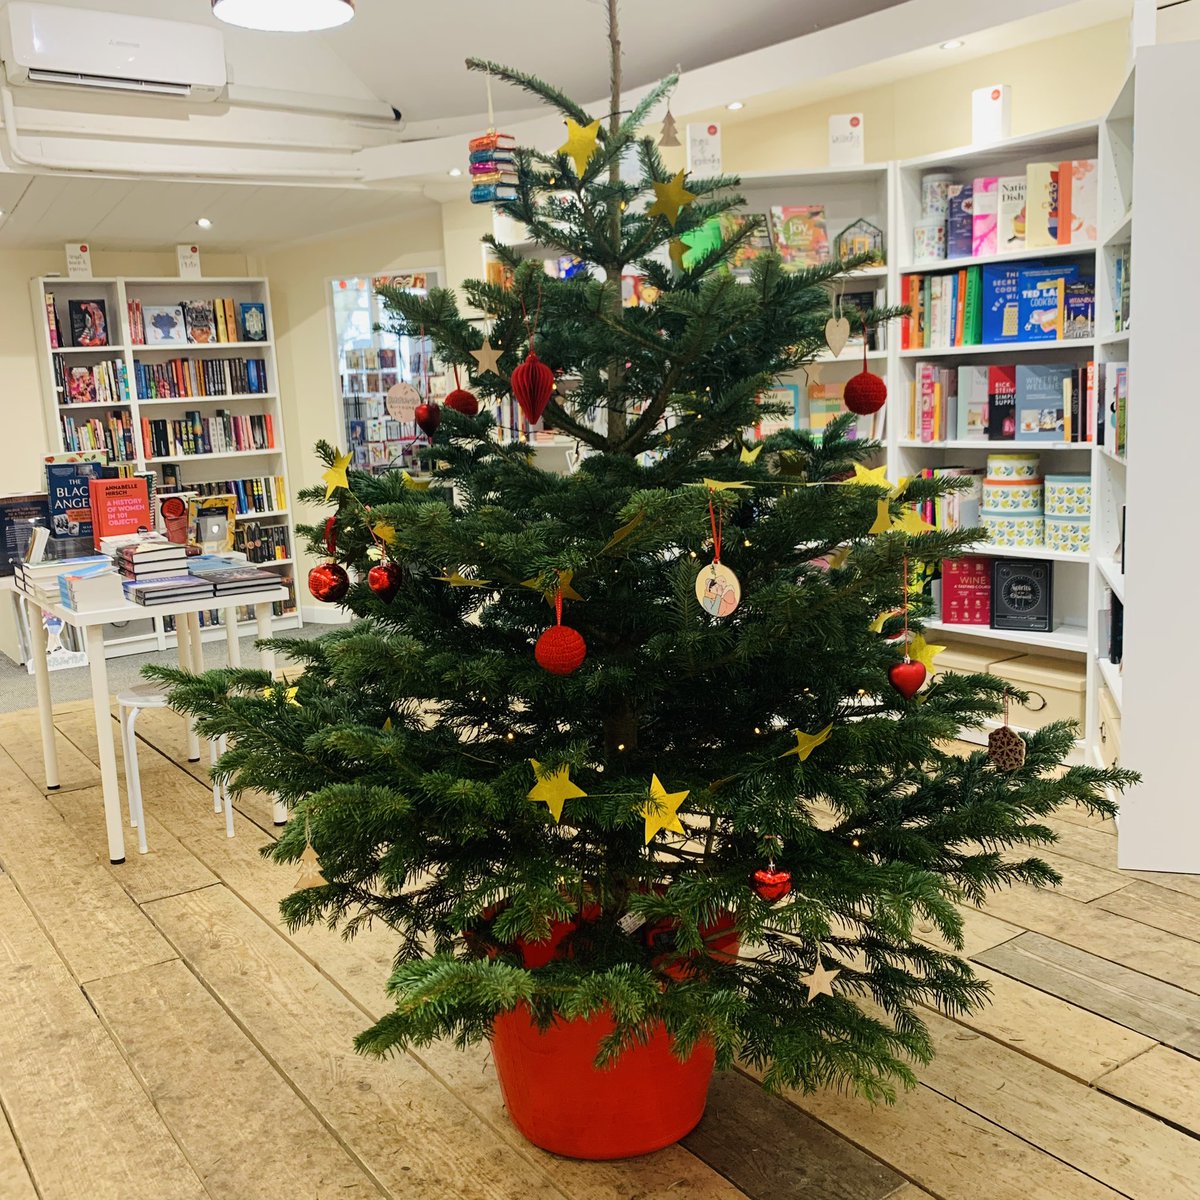 We’re OPEN UNTIL 2pm today! For all your last minute Christmassy needs* 🎄📚🎁🧩♟️🛍️💌📖🎁📚🎄 *except turkeys